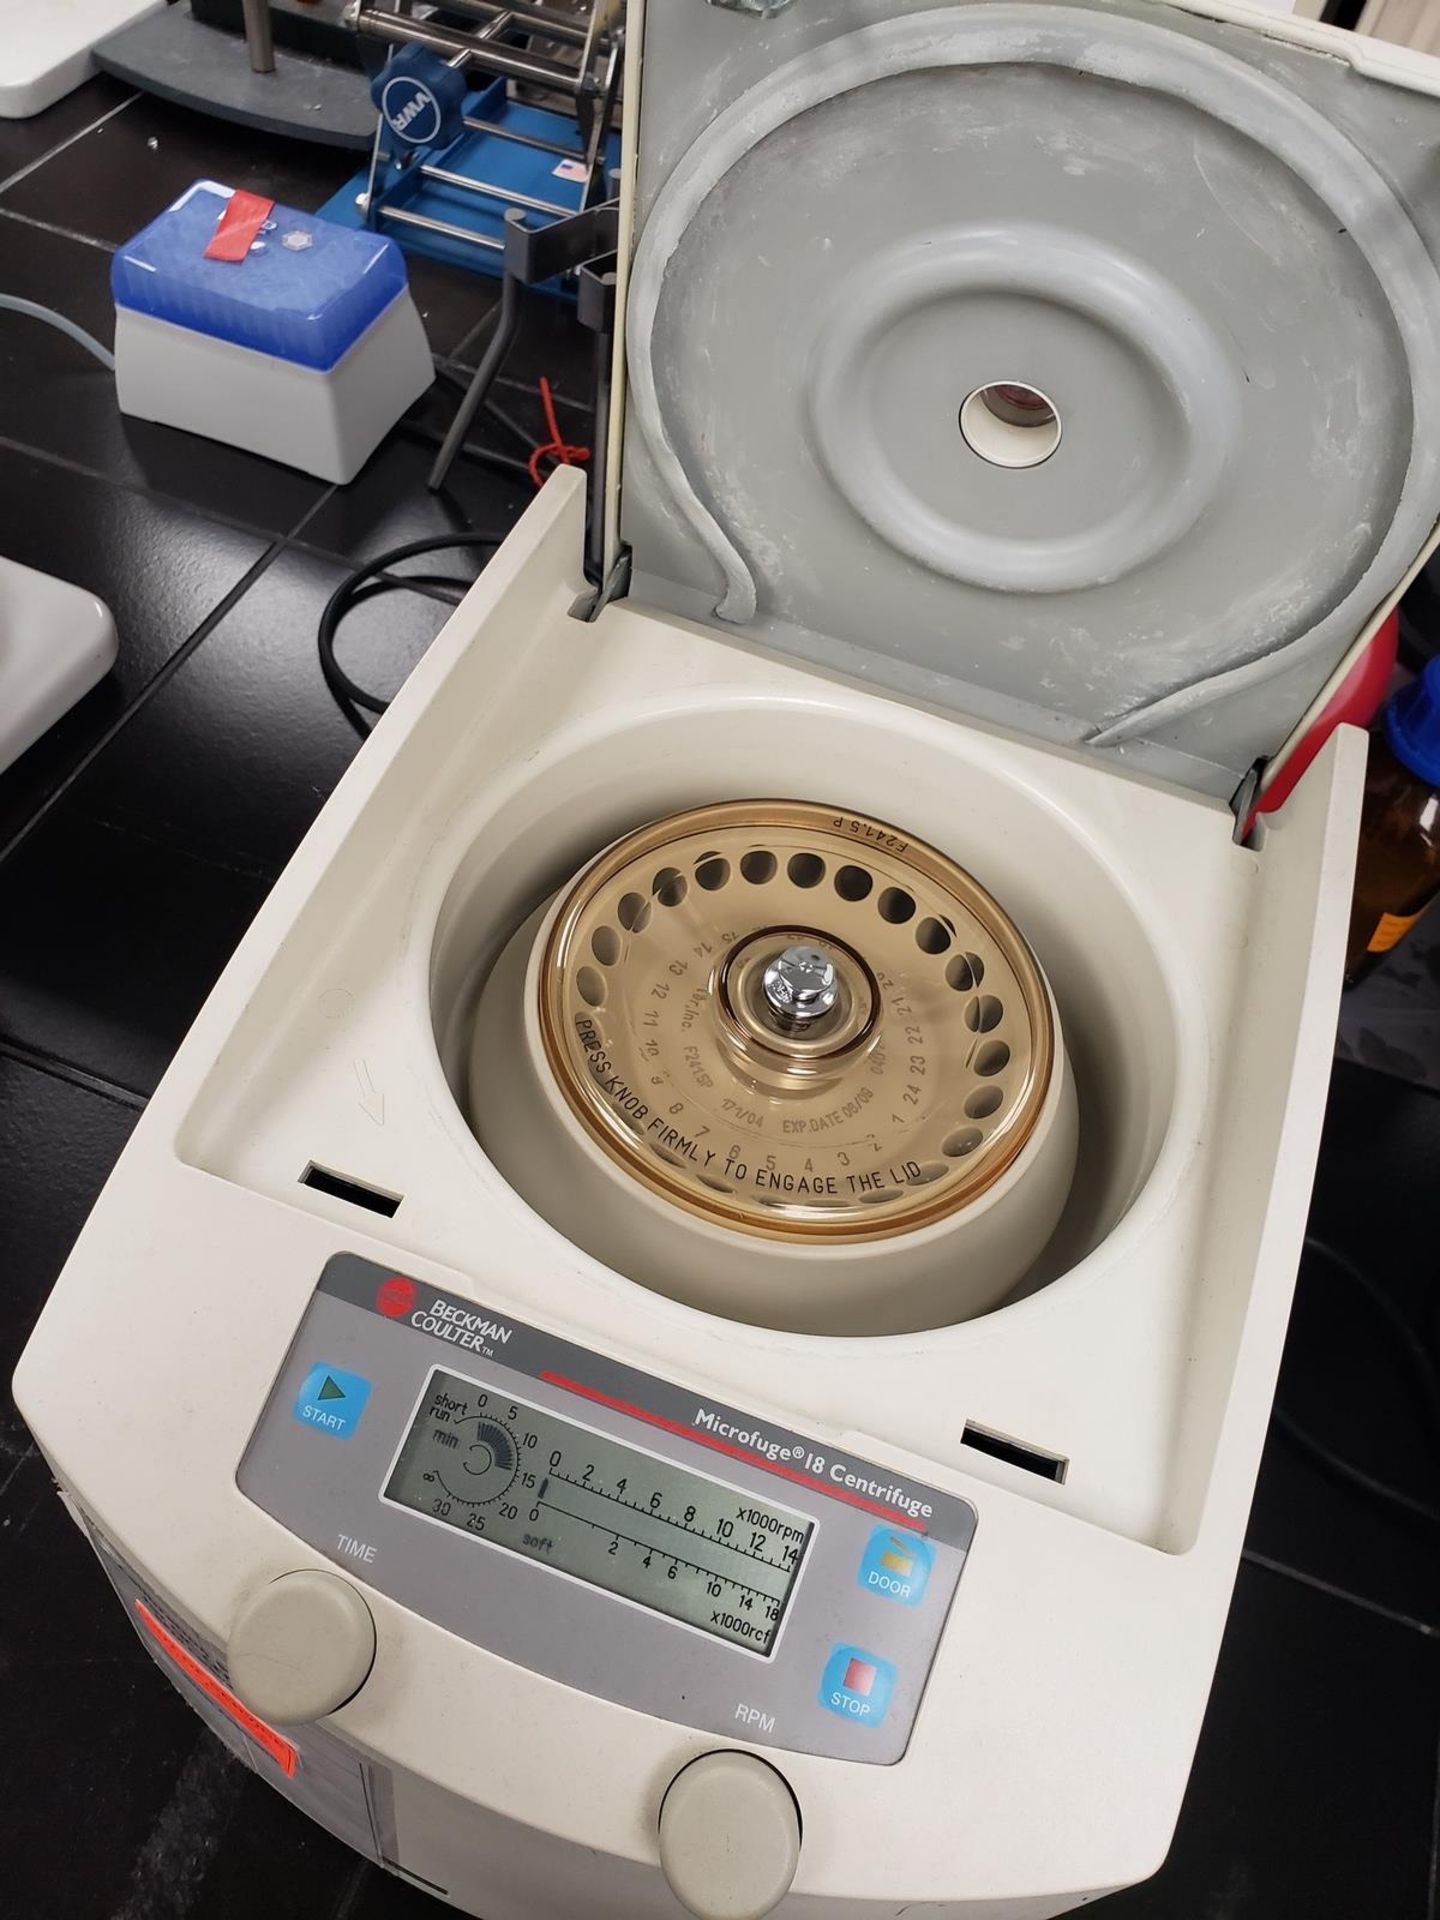 Beckman Coulter Microfuge 18 Centrifuge, M# 367160, S/N MFA04G031 | Rig Fee $75 - Image 3 of 3